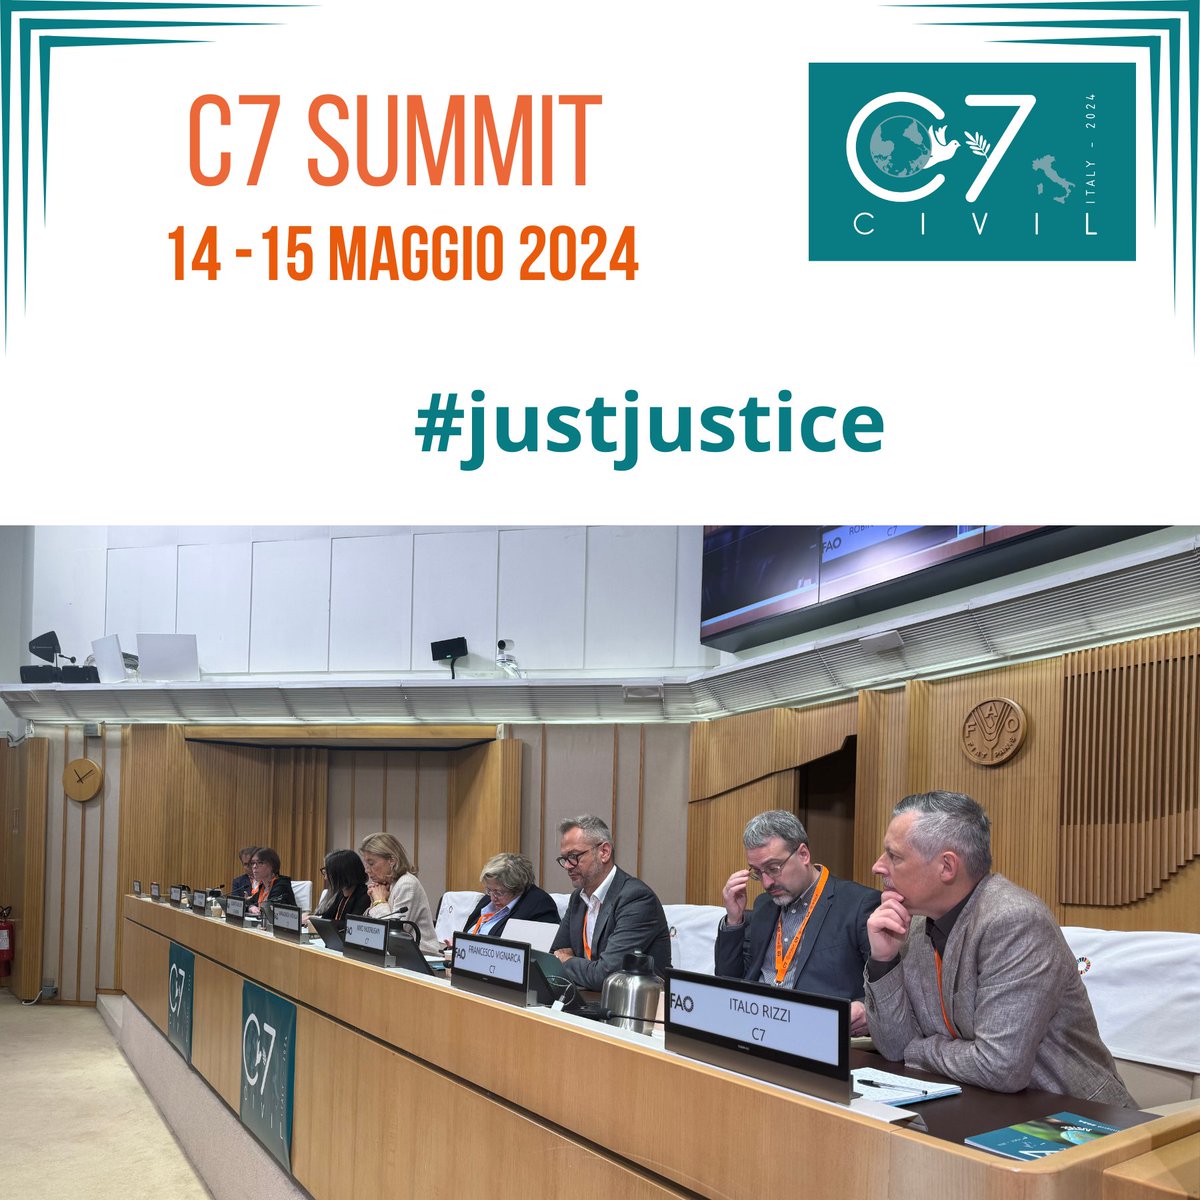 #justjustice  C7 Working Group coordinators interact with G7 Sherpa Elisabetta Belloni on the contents of the C7 Communiqué and its recommendations #civil72024, #civil7Italy, #civil7ITA, #G7ITA, #g7italy